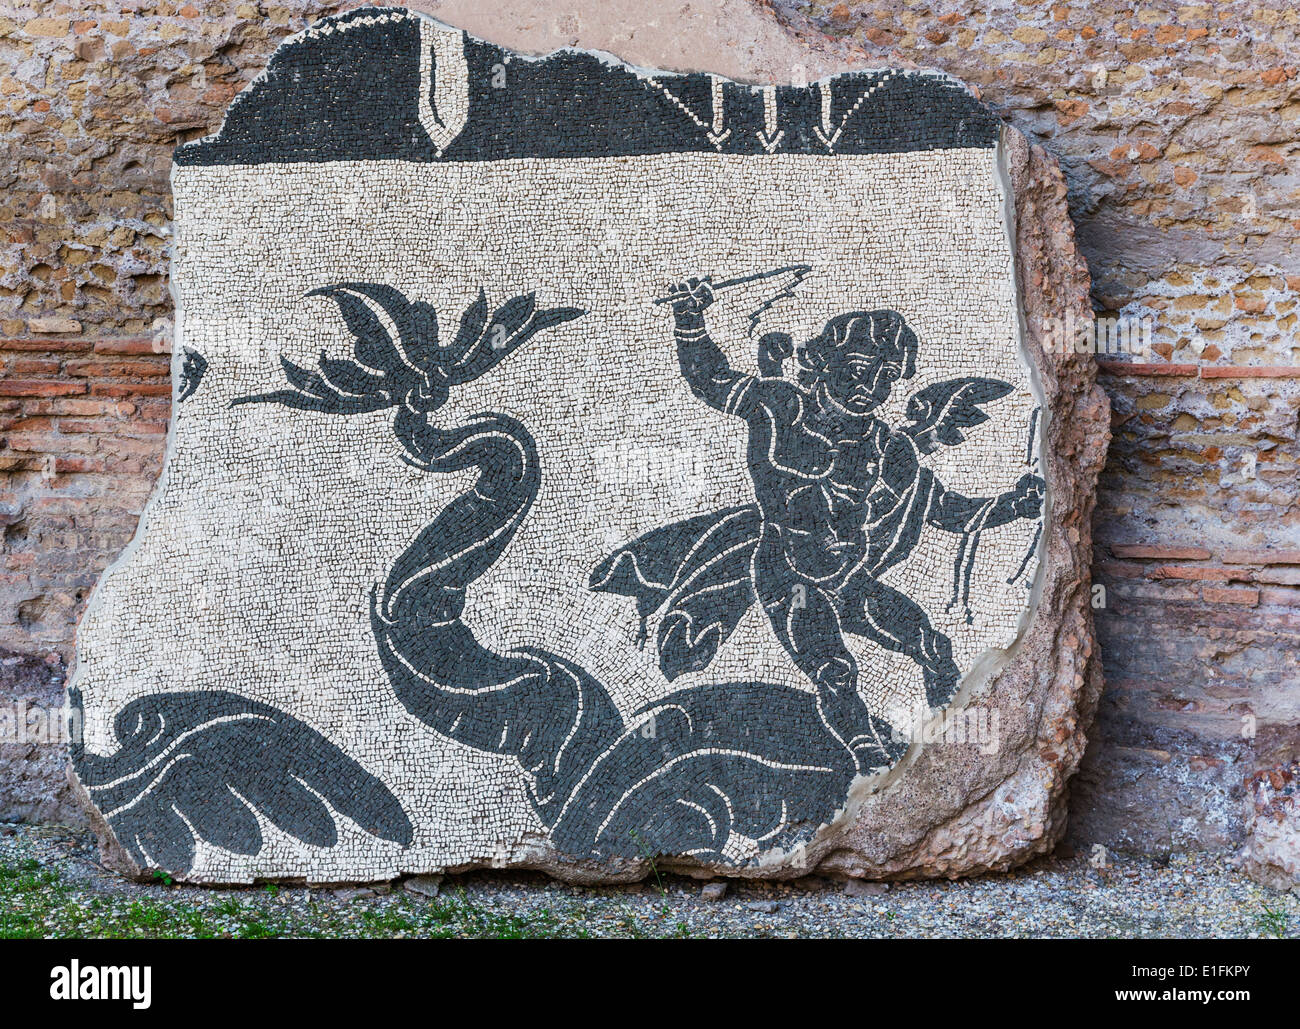 Rome, Italy. Baths of Caracalla. Fragment of mosaic in the Palaestra, boy riding what may be a dolphin. Stock Photo